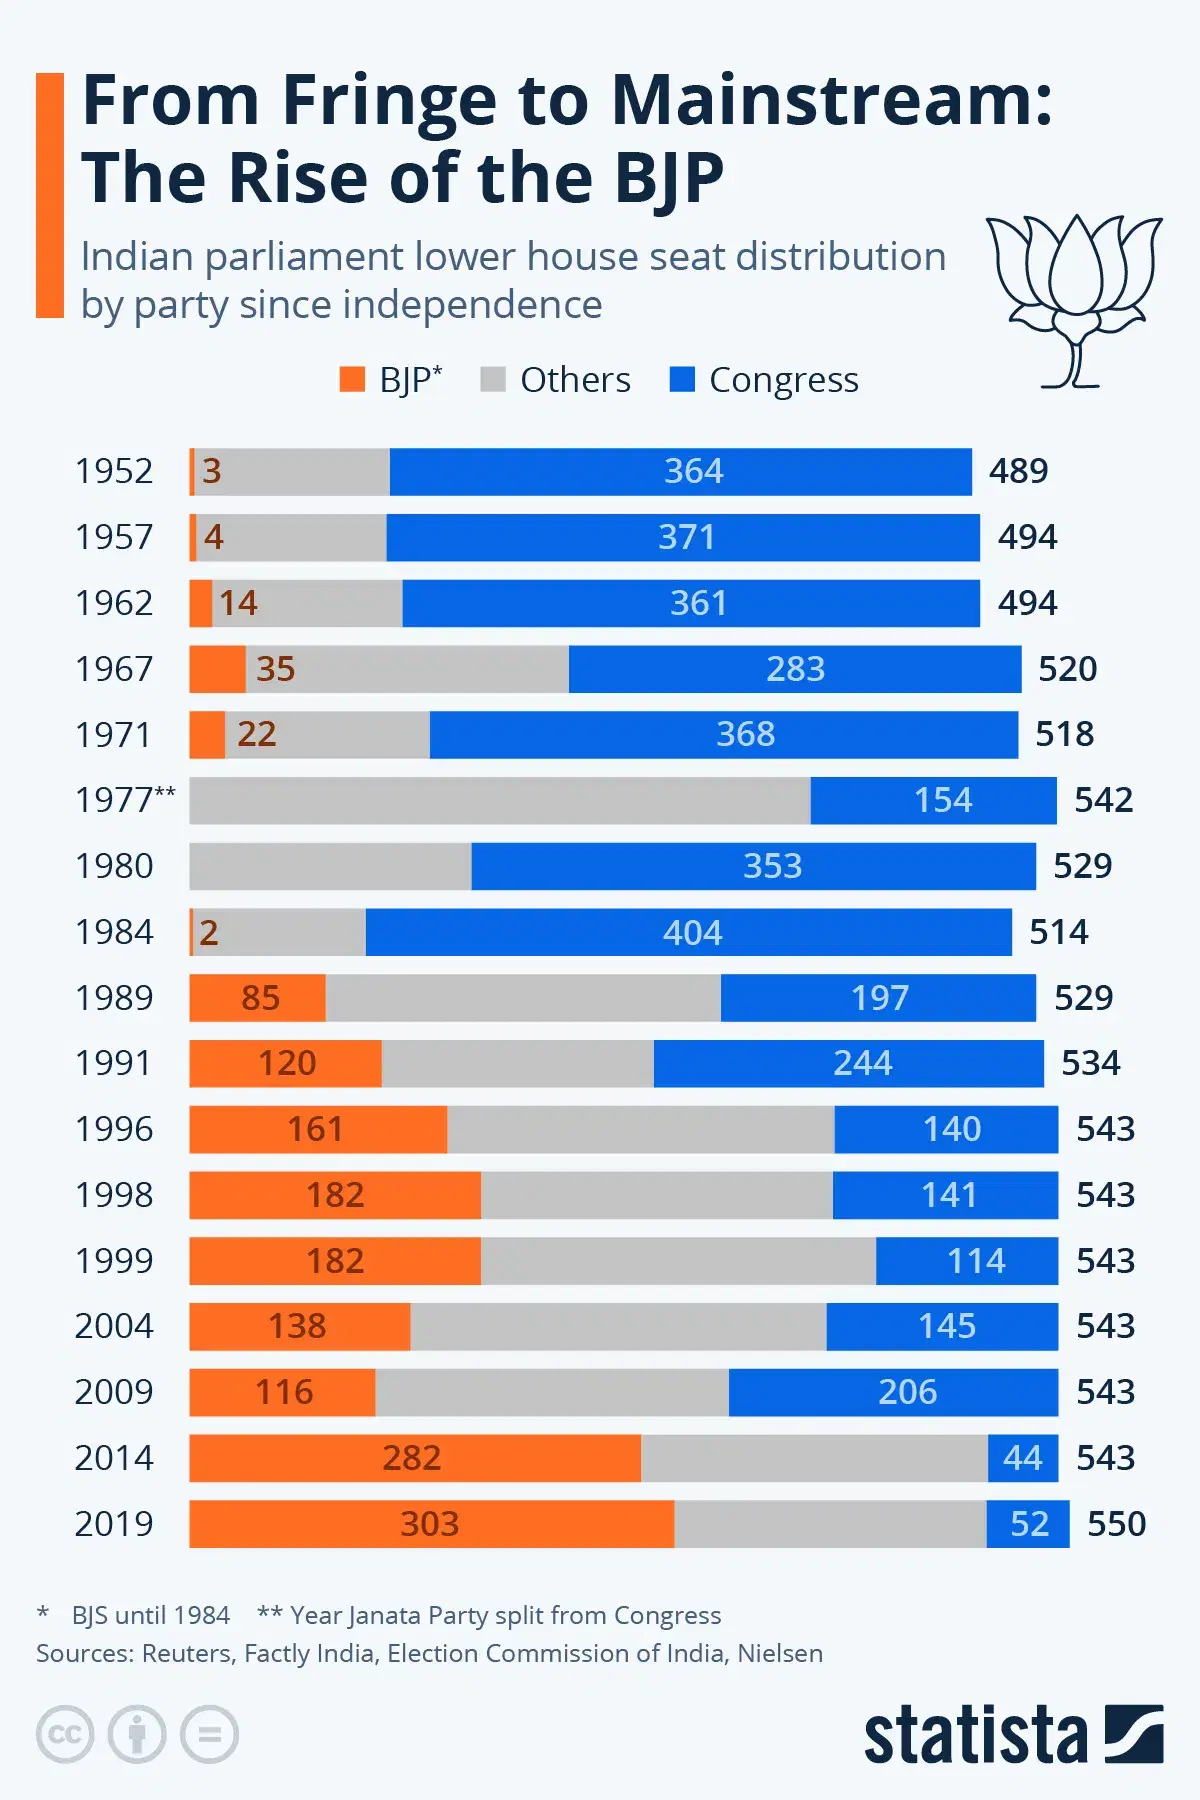 From Fringe to Mainstream: The Rise of the BJP in India